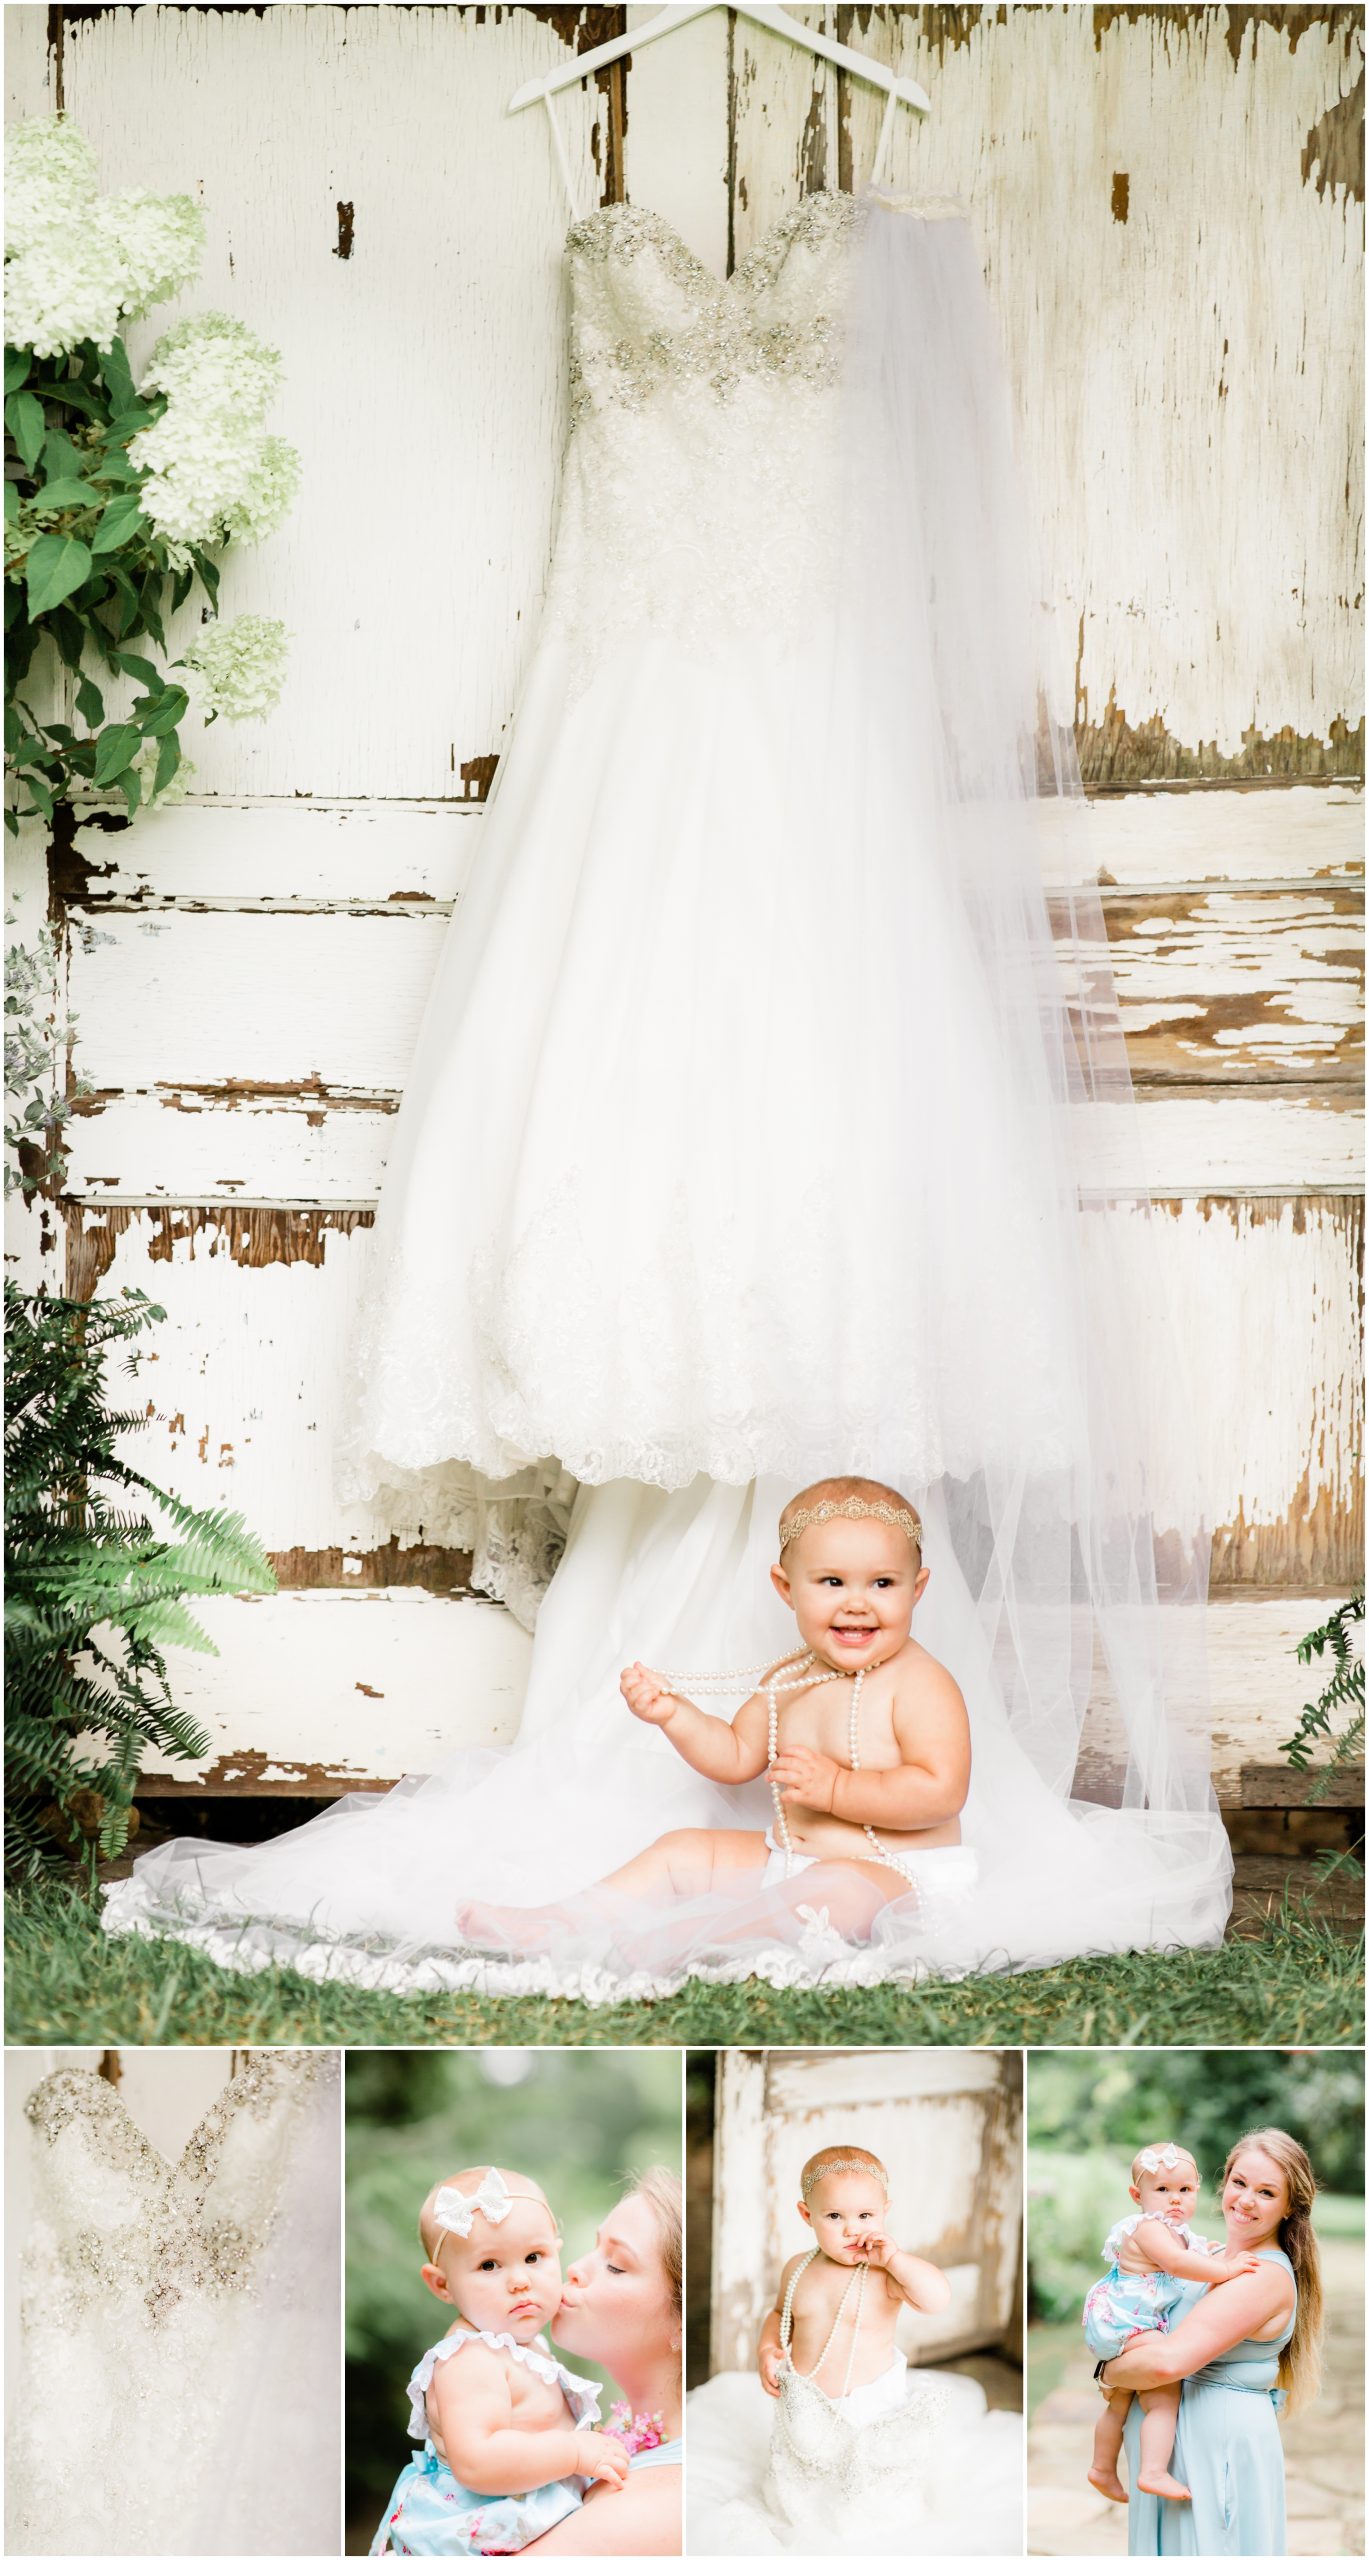 eleanor's first birthday session at black fox farms with alyssa rachelle photography